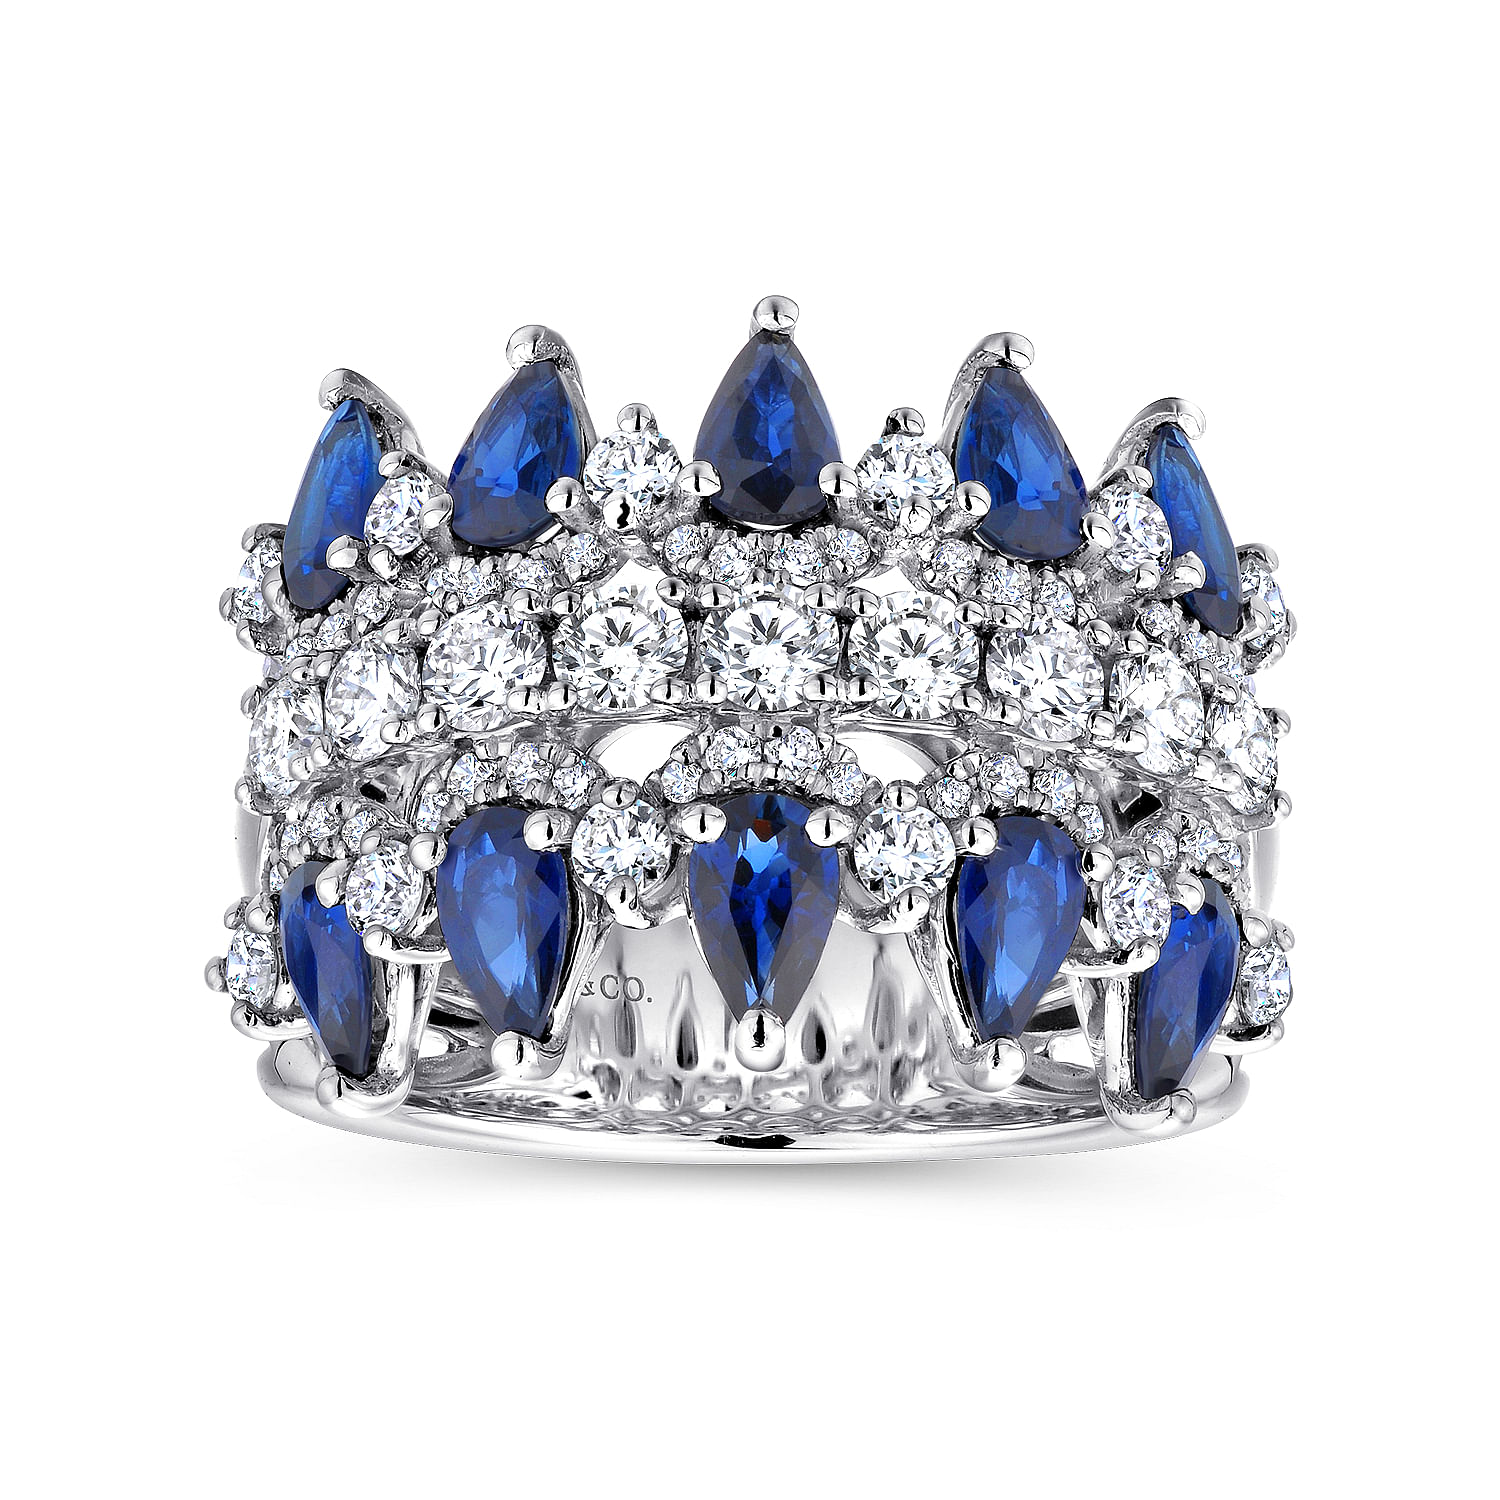 Wide 14K White Gold Round and Pear Shaped Diamond and Sapphire Anniversary Band